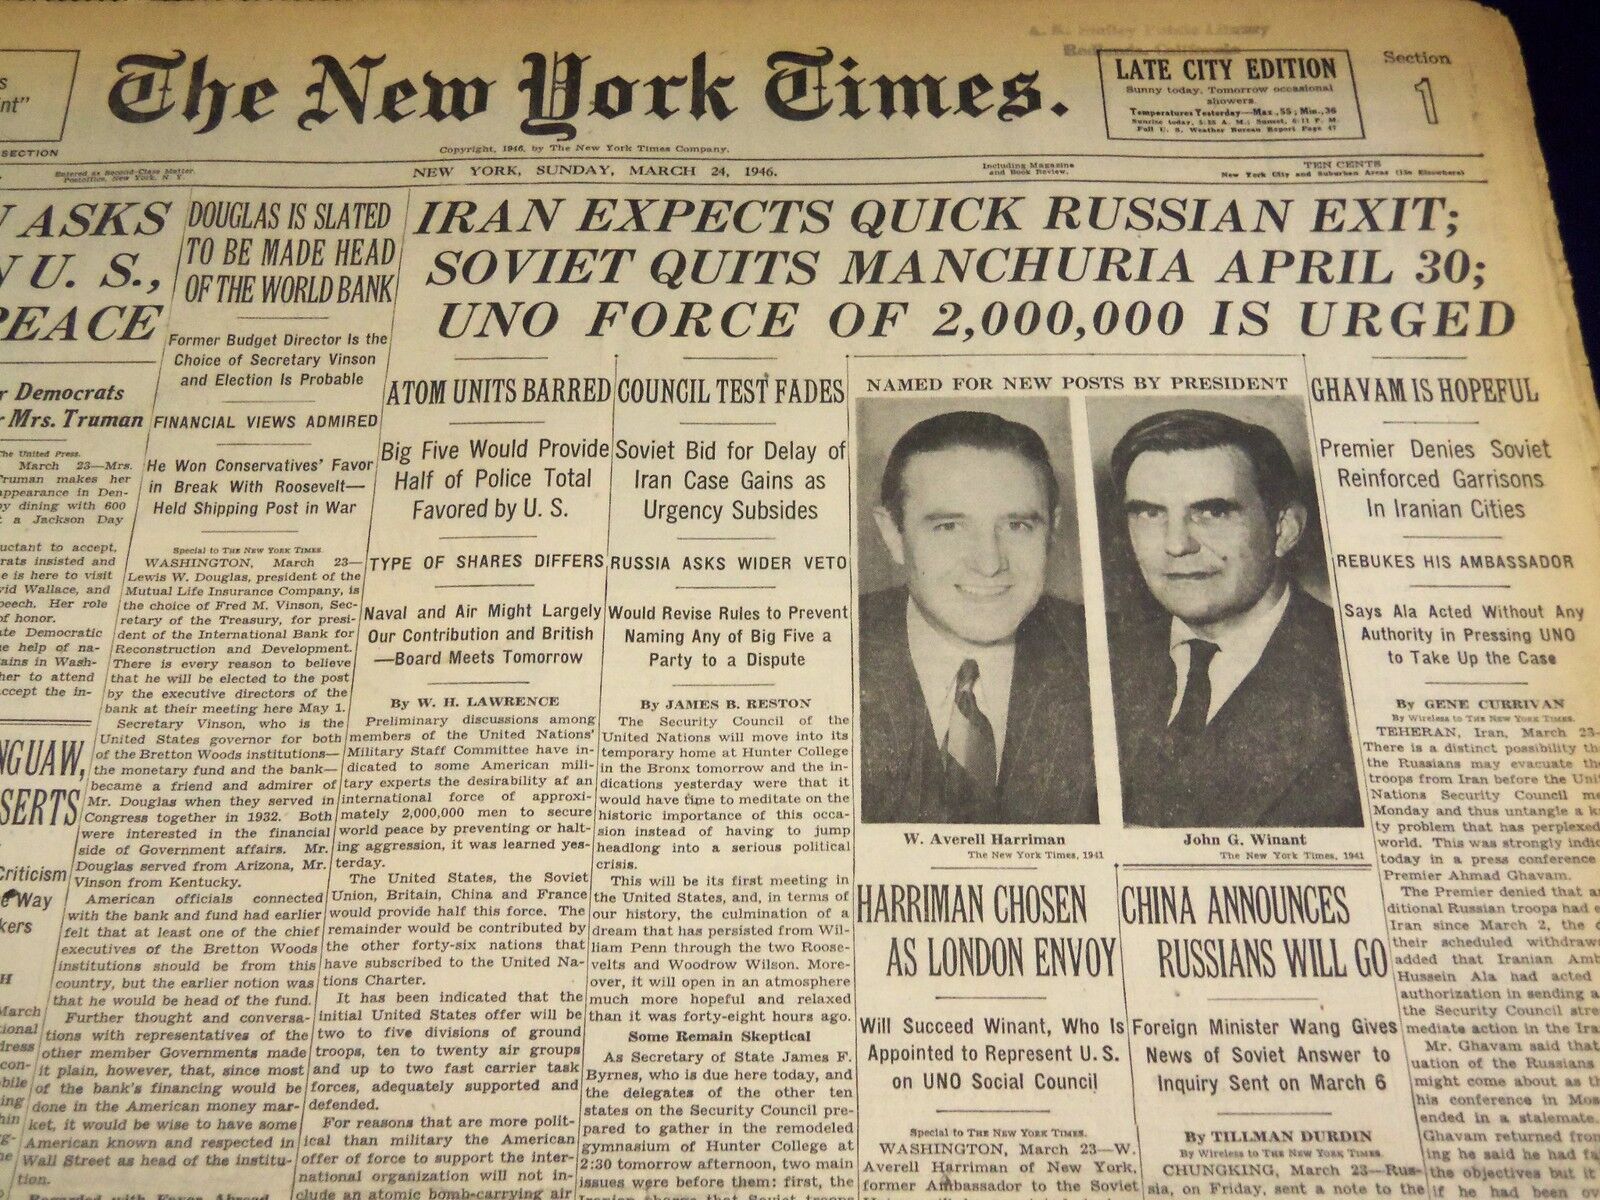 1946 MARCH 24 NEW YORK TIMES - IRAN EXPECTS QUICK RUSSIAN EXIT - NT 2614